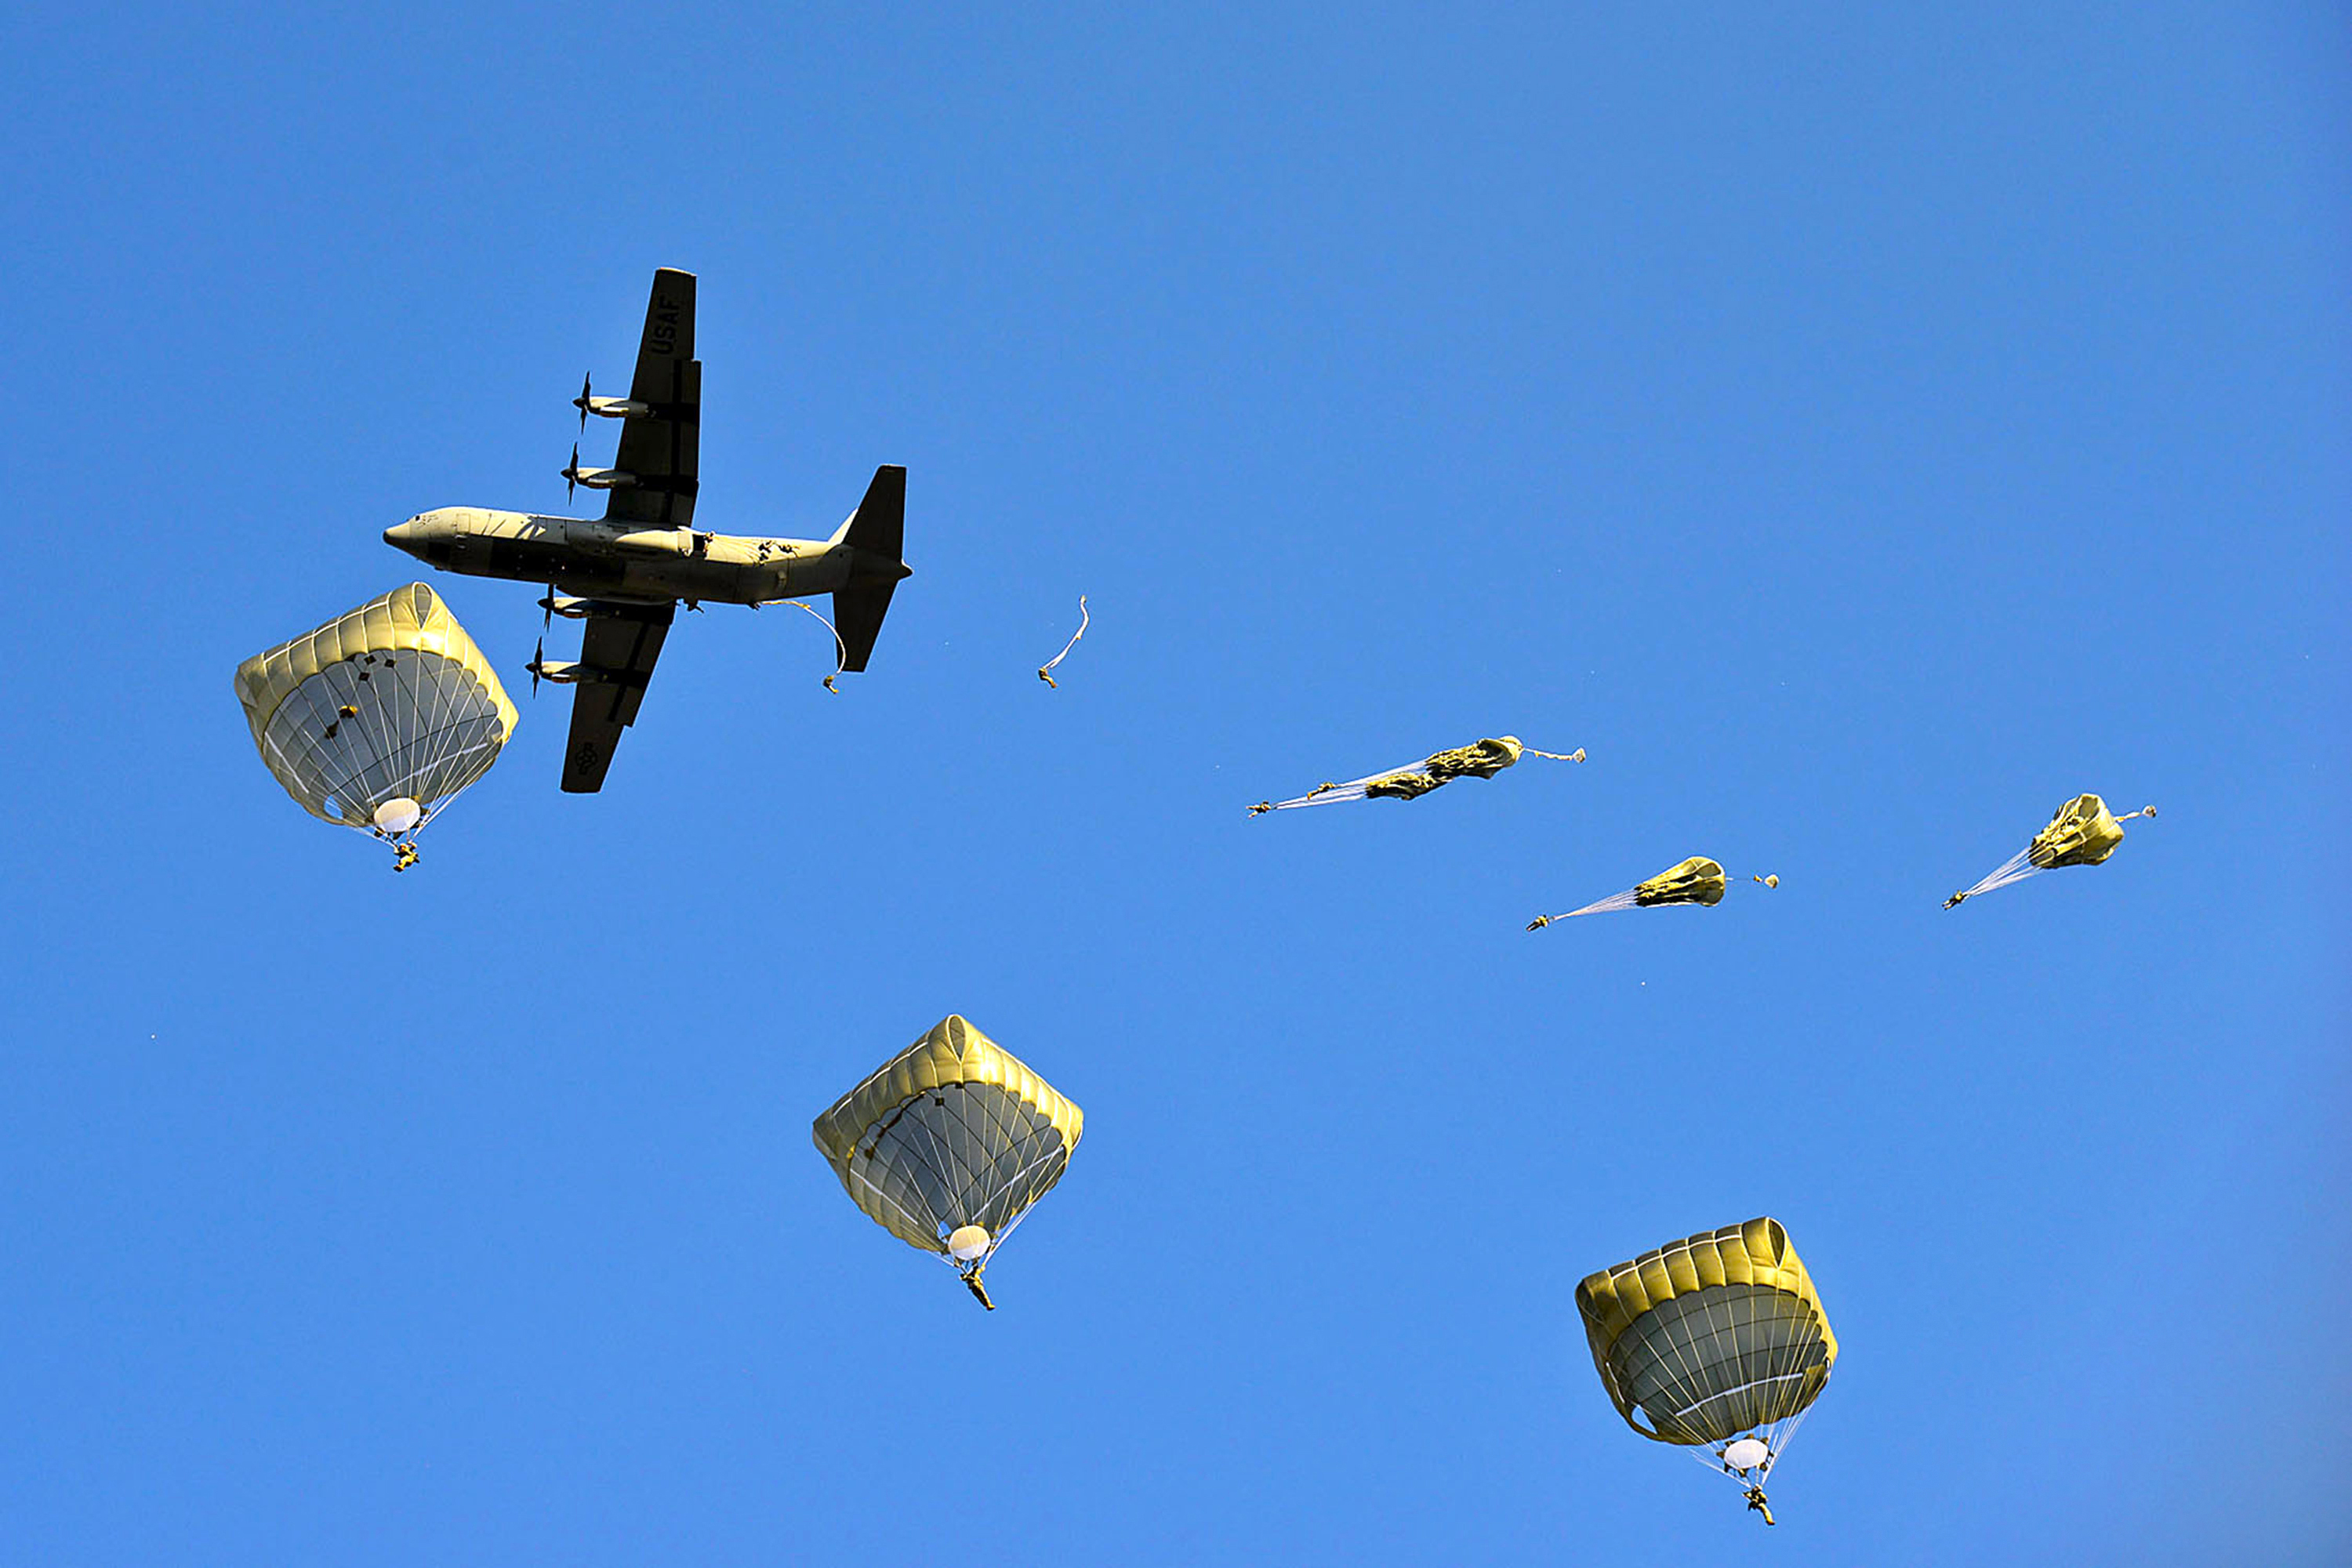 U.S. paratroopers jump out of a C-130 Hercules aircraft over Juliet drop  zone in Pordenone